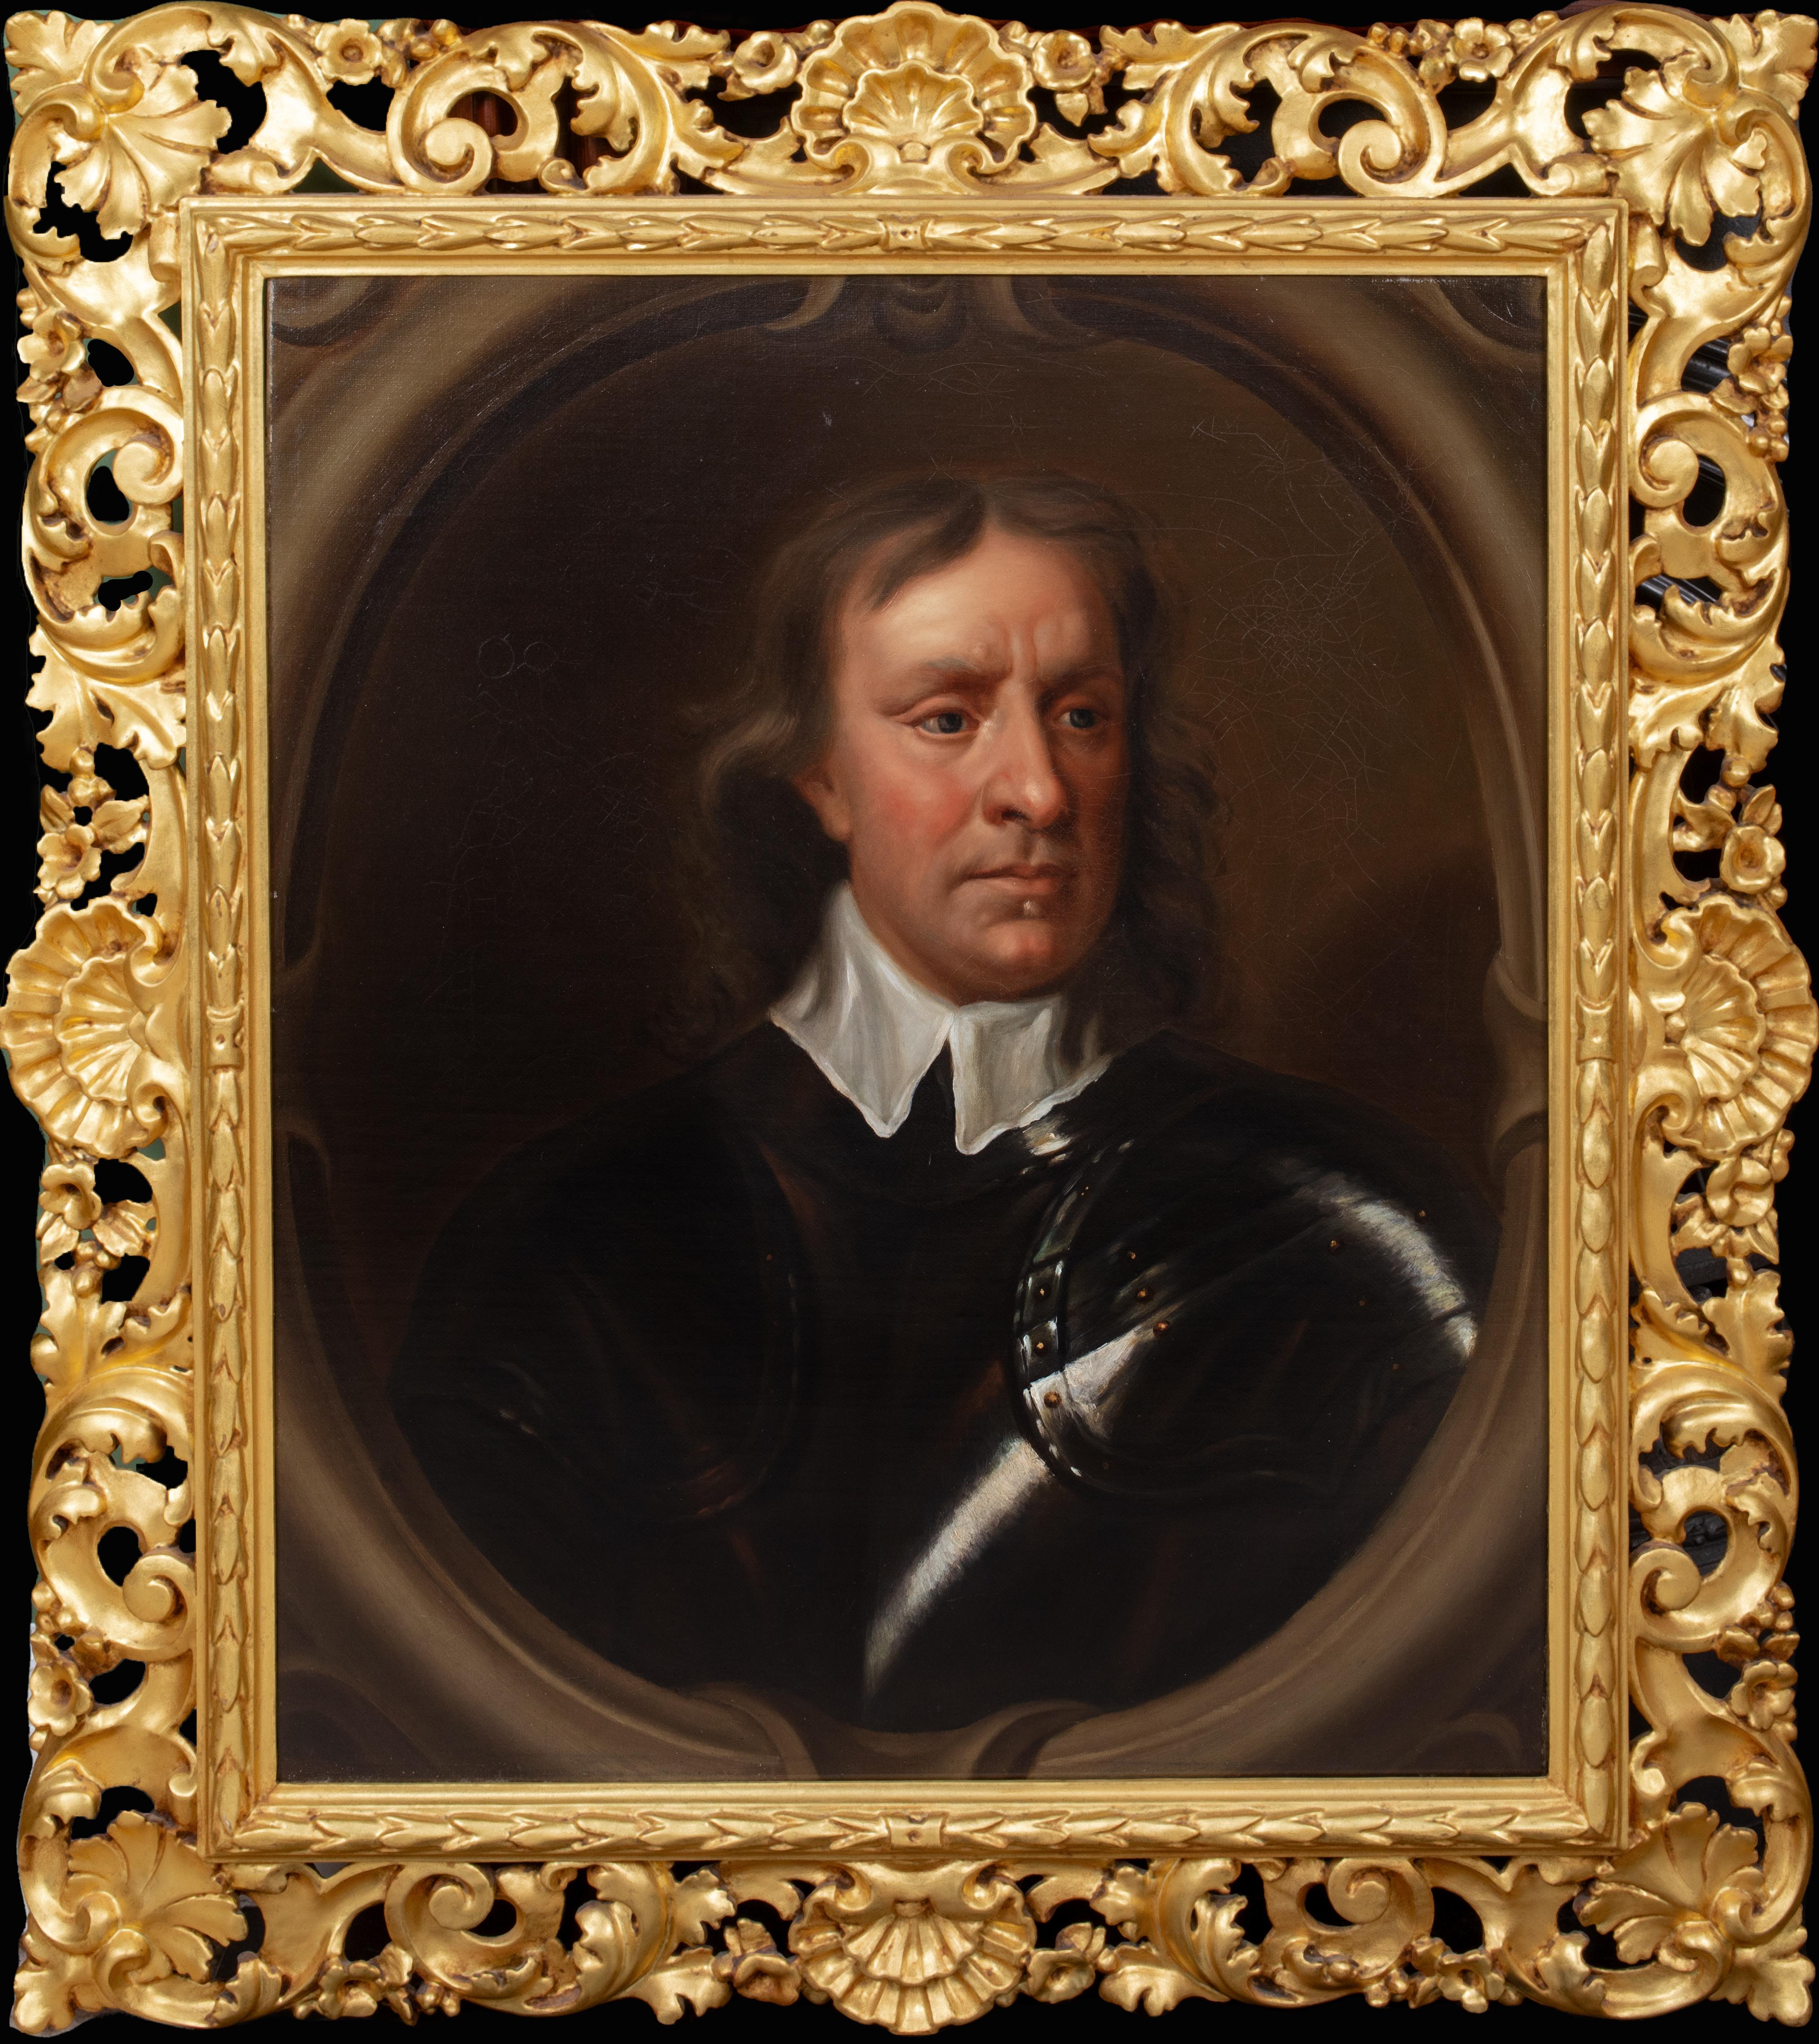 Sir Peter Lely Portrait Painting – Porträt von Sir Oliver Cromwell (1599-1658) SIR PETER LELY (1599-1658)